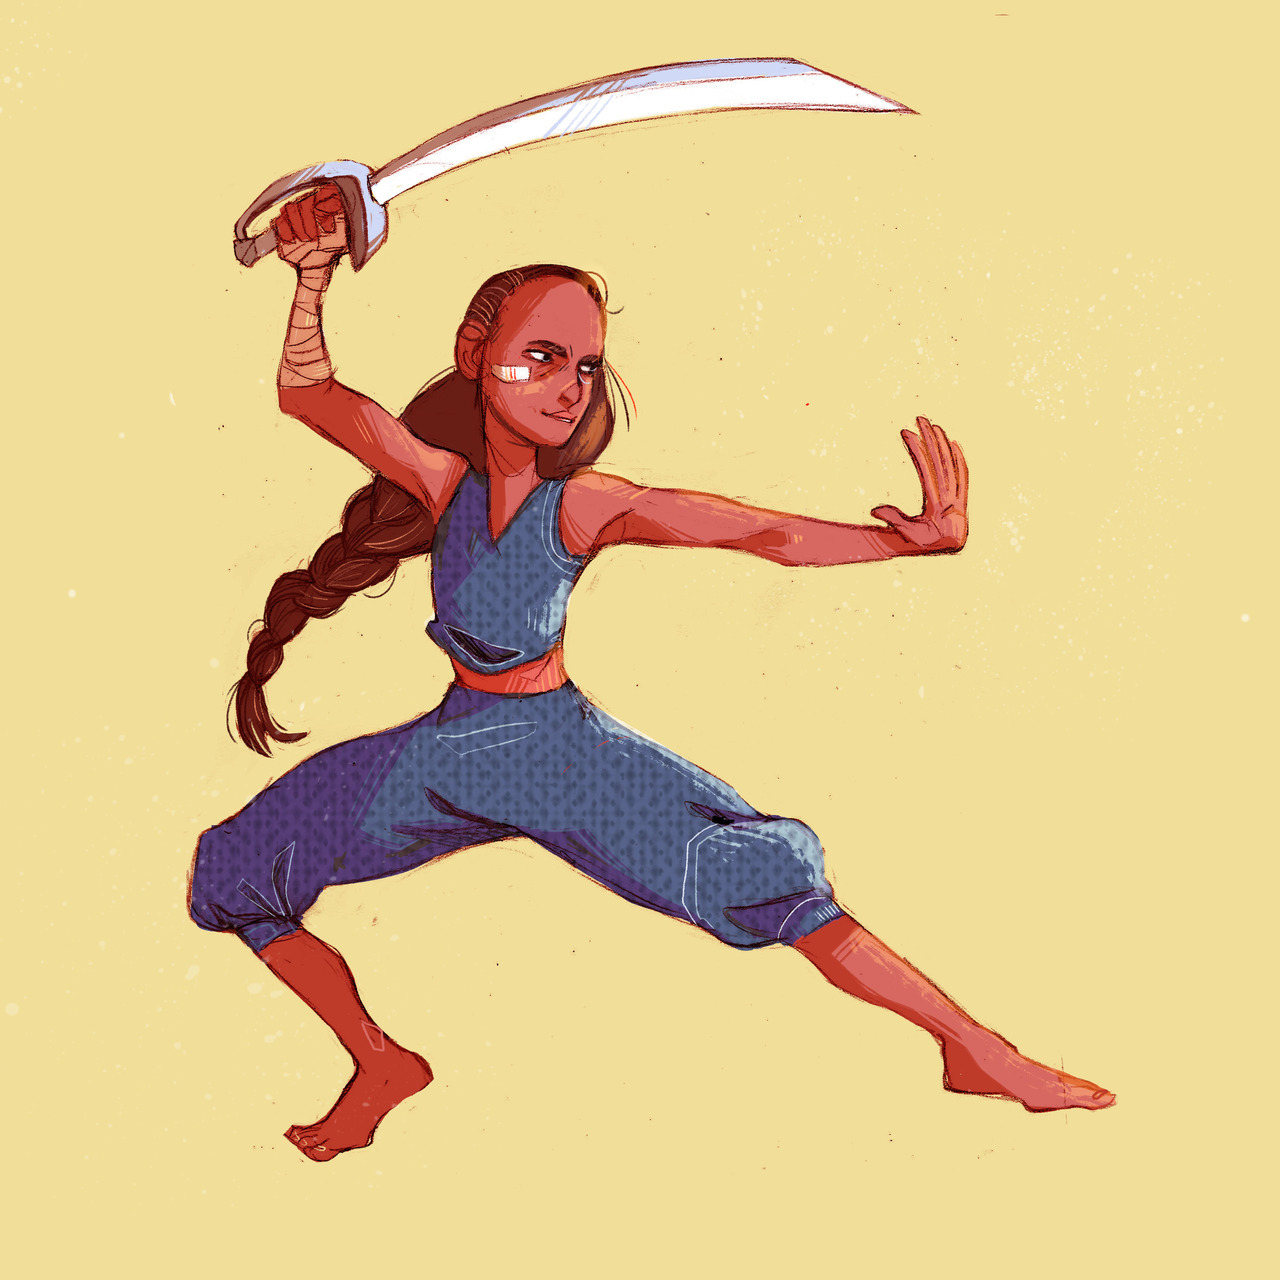 swordfighting connie is the best kind of connie